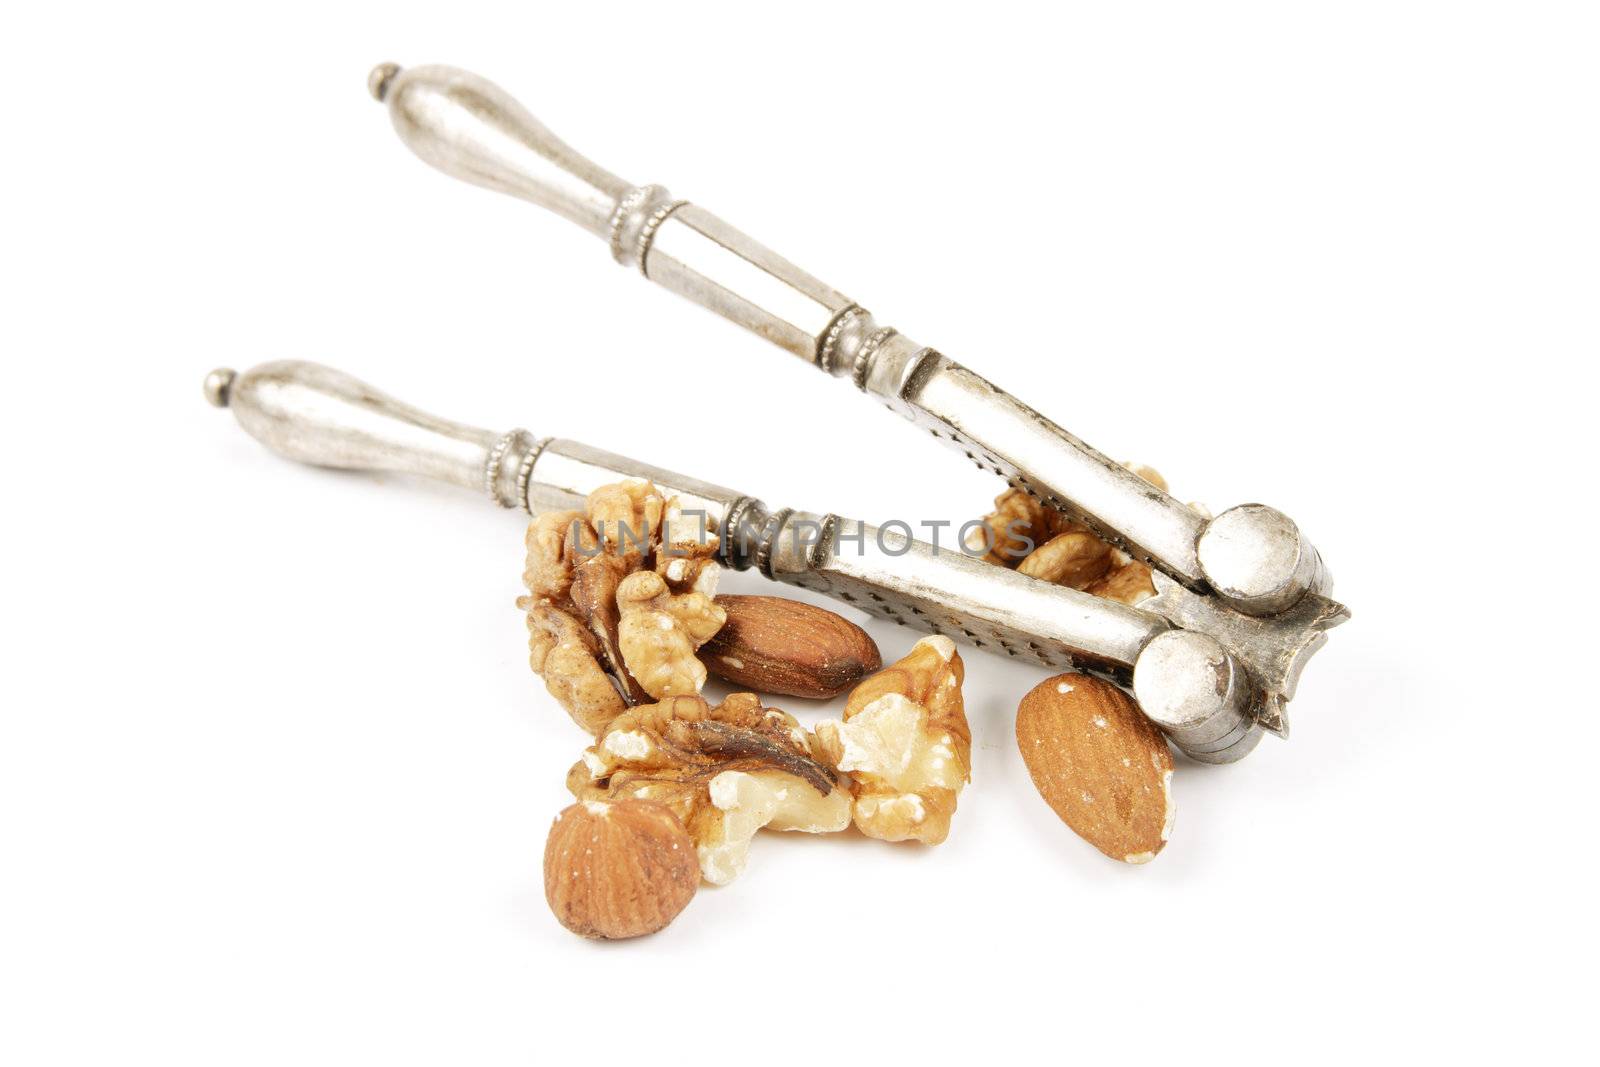 Assorted mixed nuts with a silver nutcracker on a reflective white background